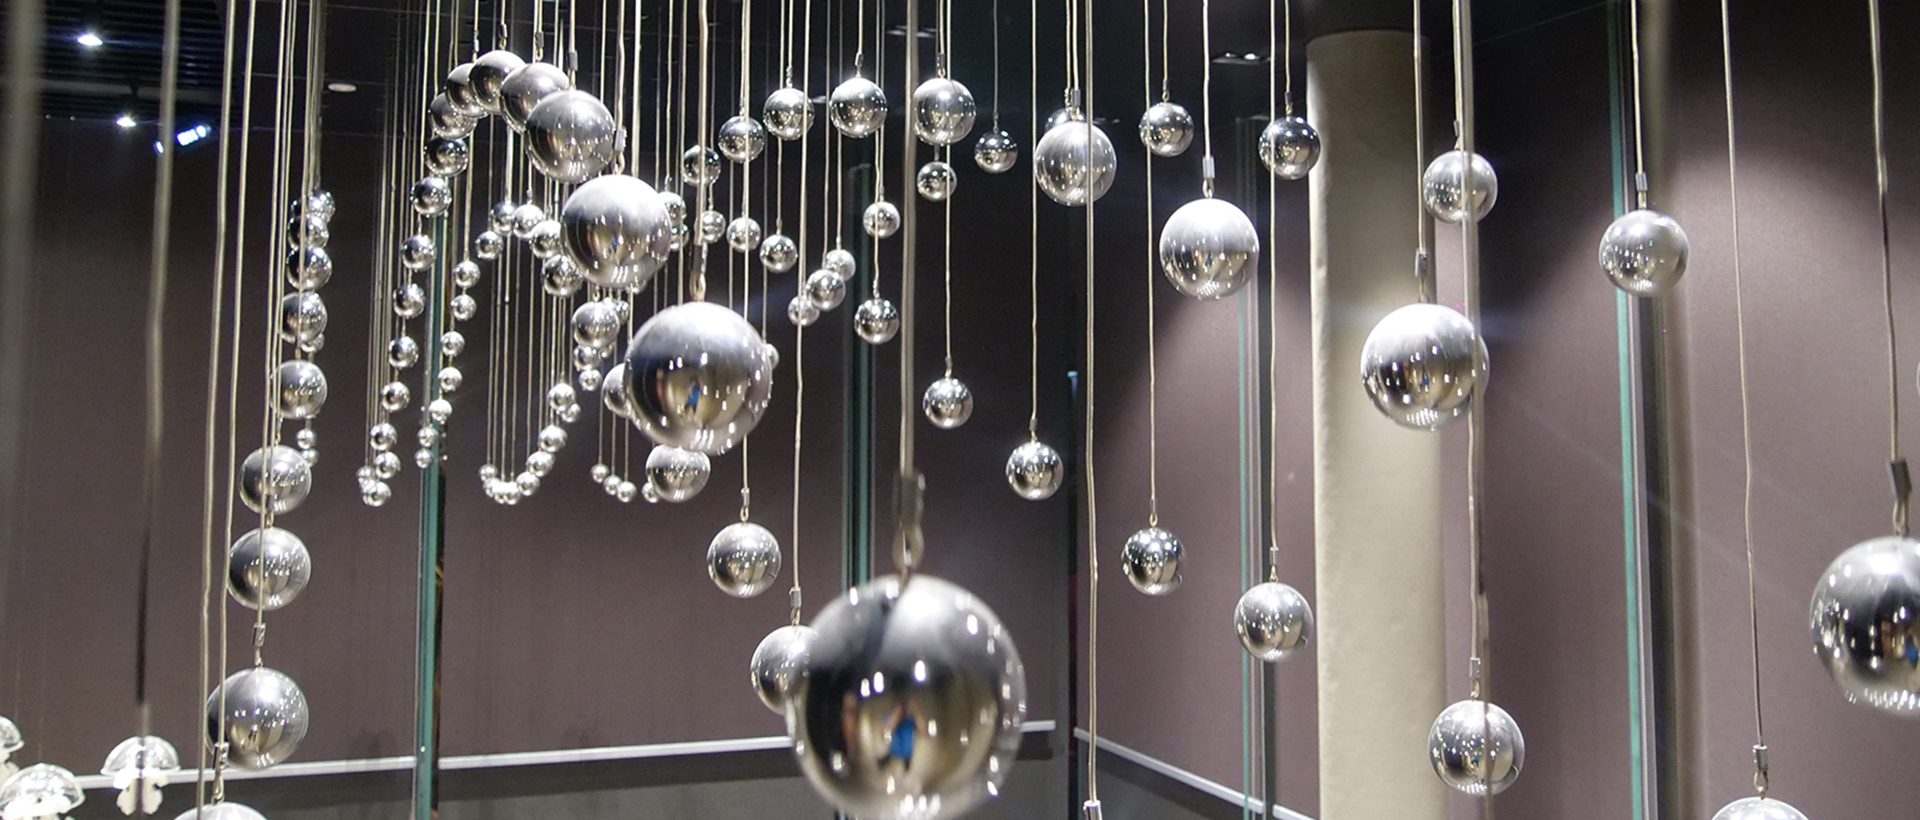 132 sets Kinetic Sculpture balls used in Guangzhou Poly Exhibition Hall 2020 (1)